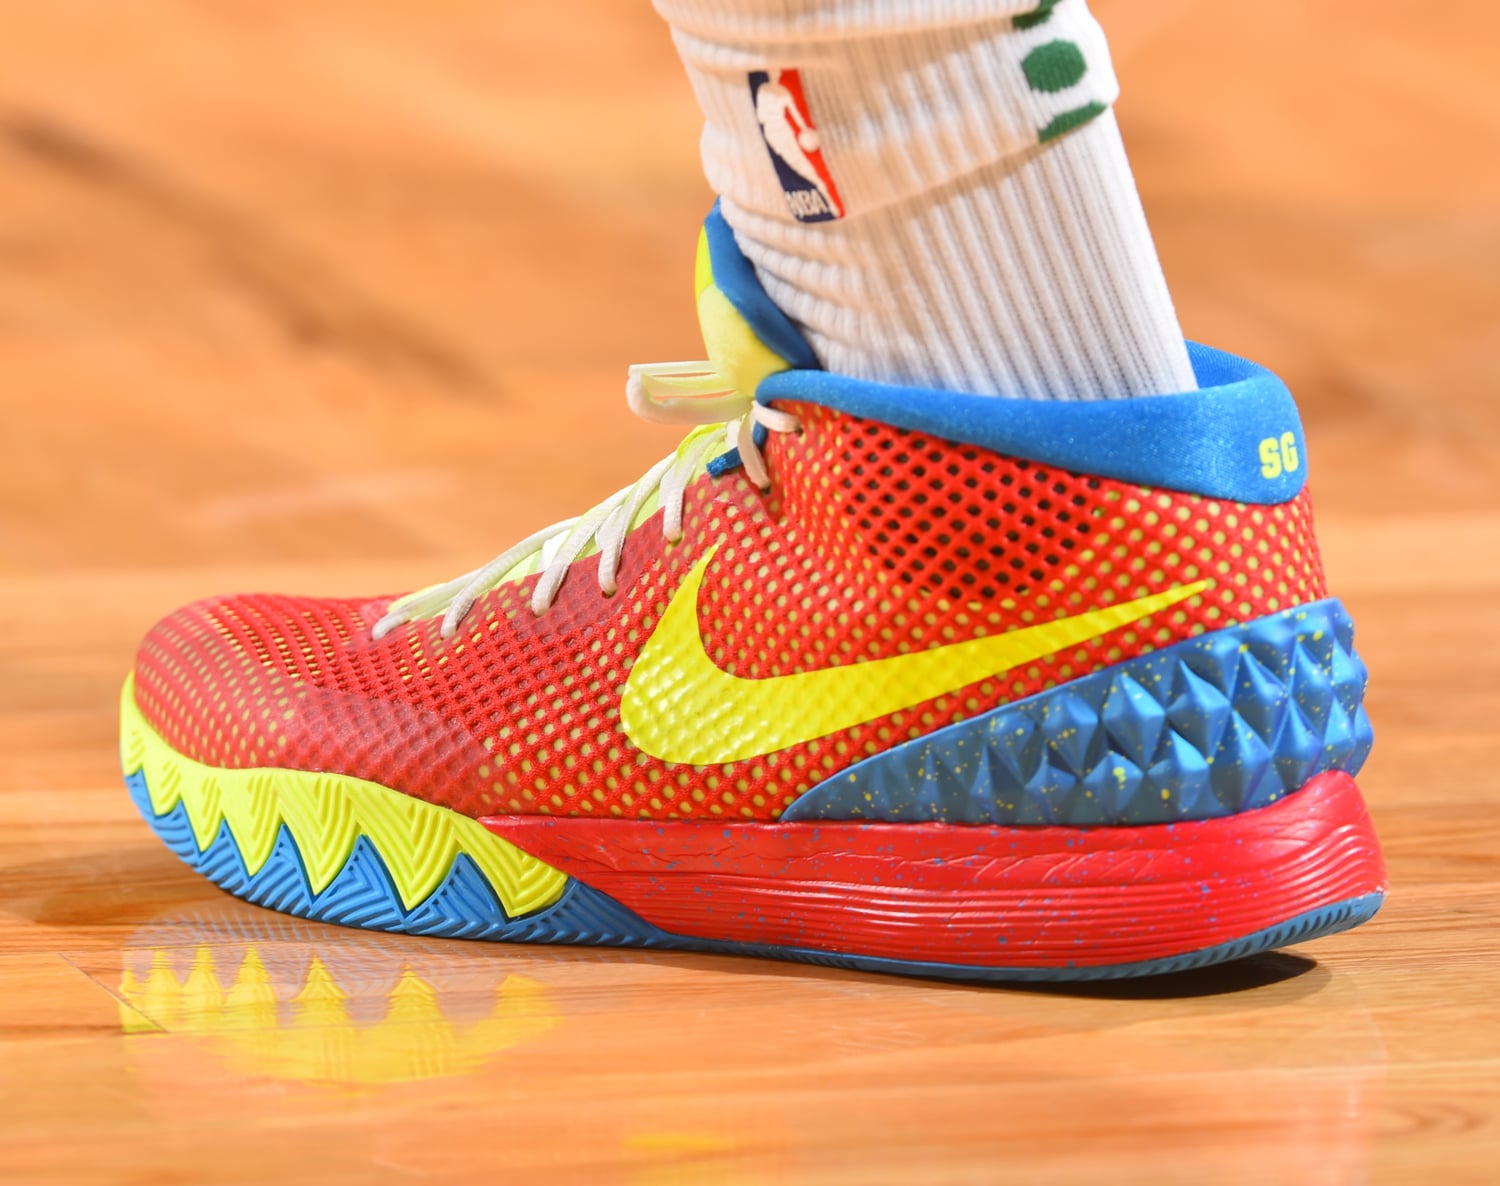 Terry Rozier - Nike Kyrie 1